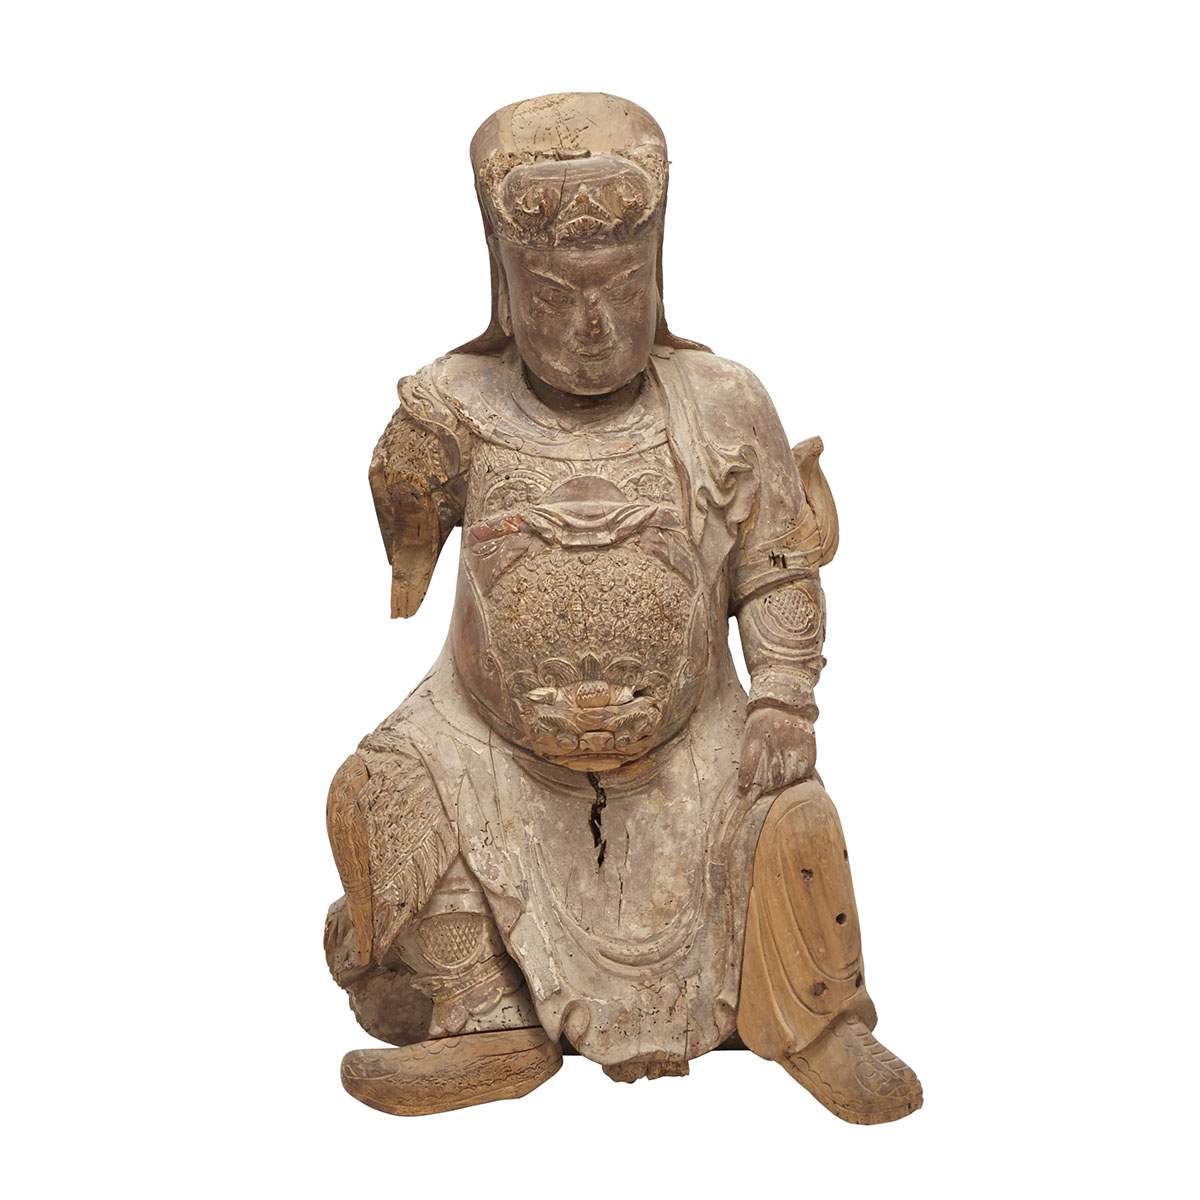 A Finely Carved Wood Figure of Guandi, Qing Dynasty (1644-1911)